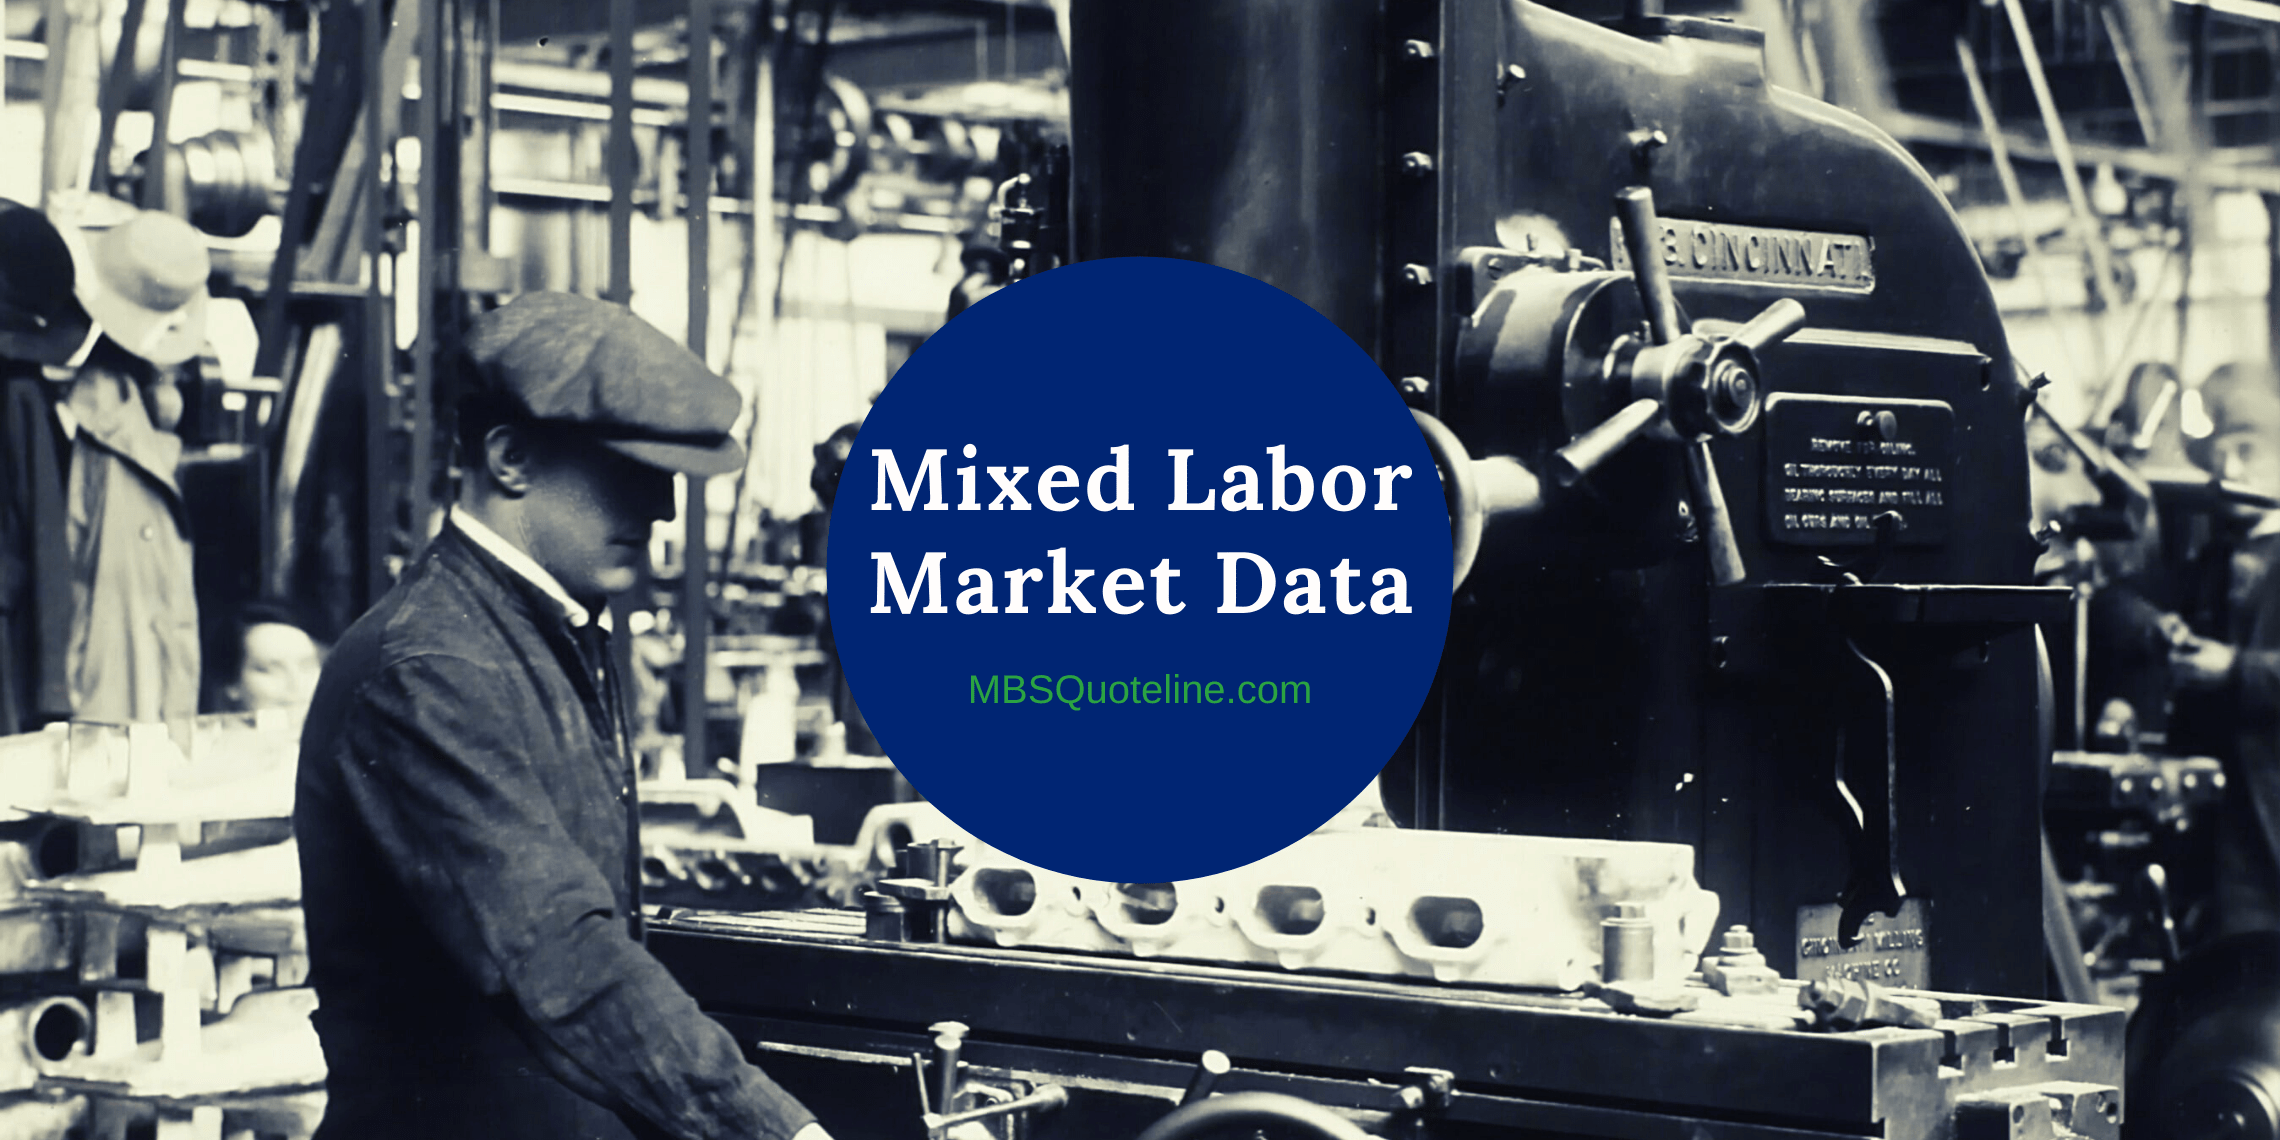 mixed labor market data mortgage-backed securities featured